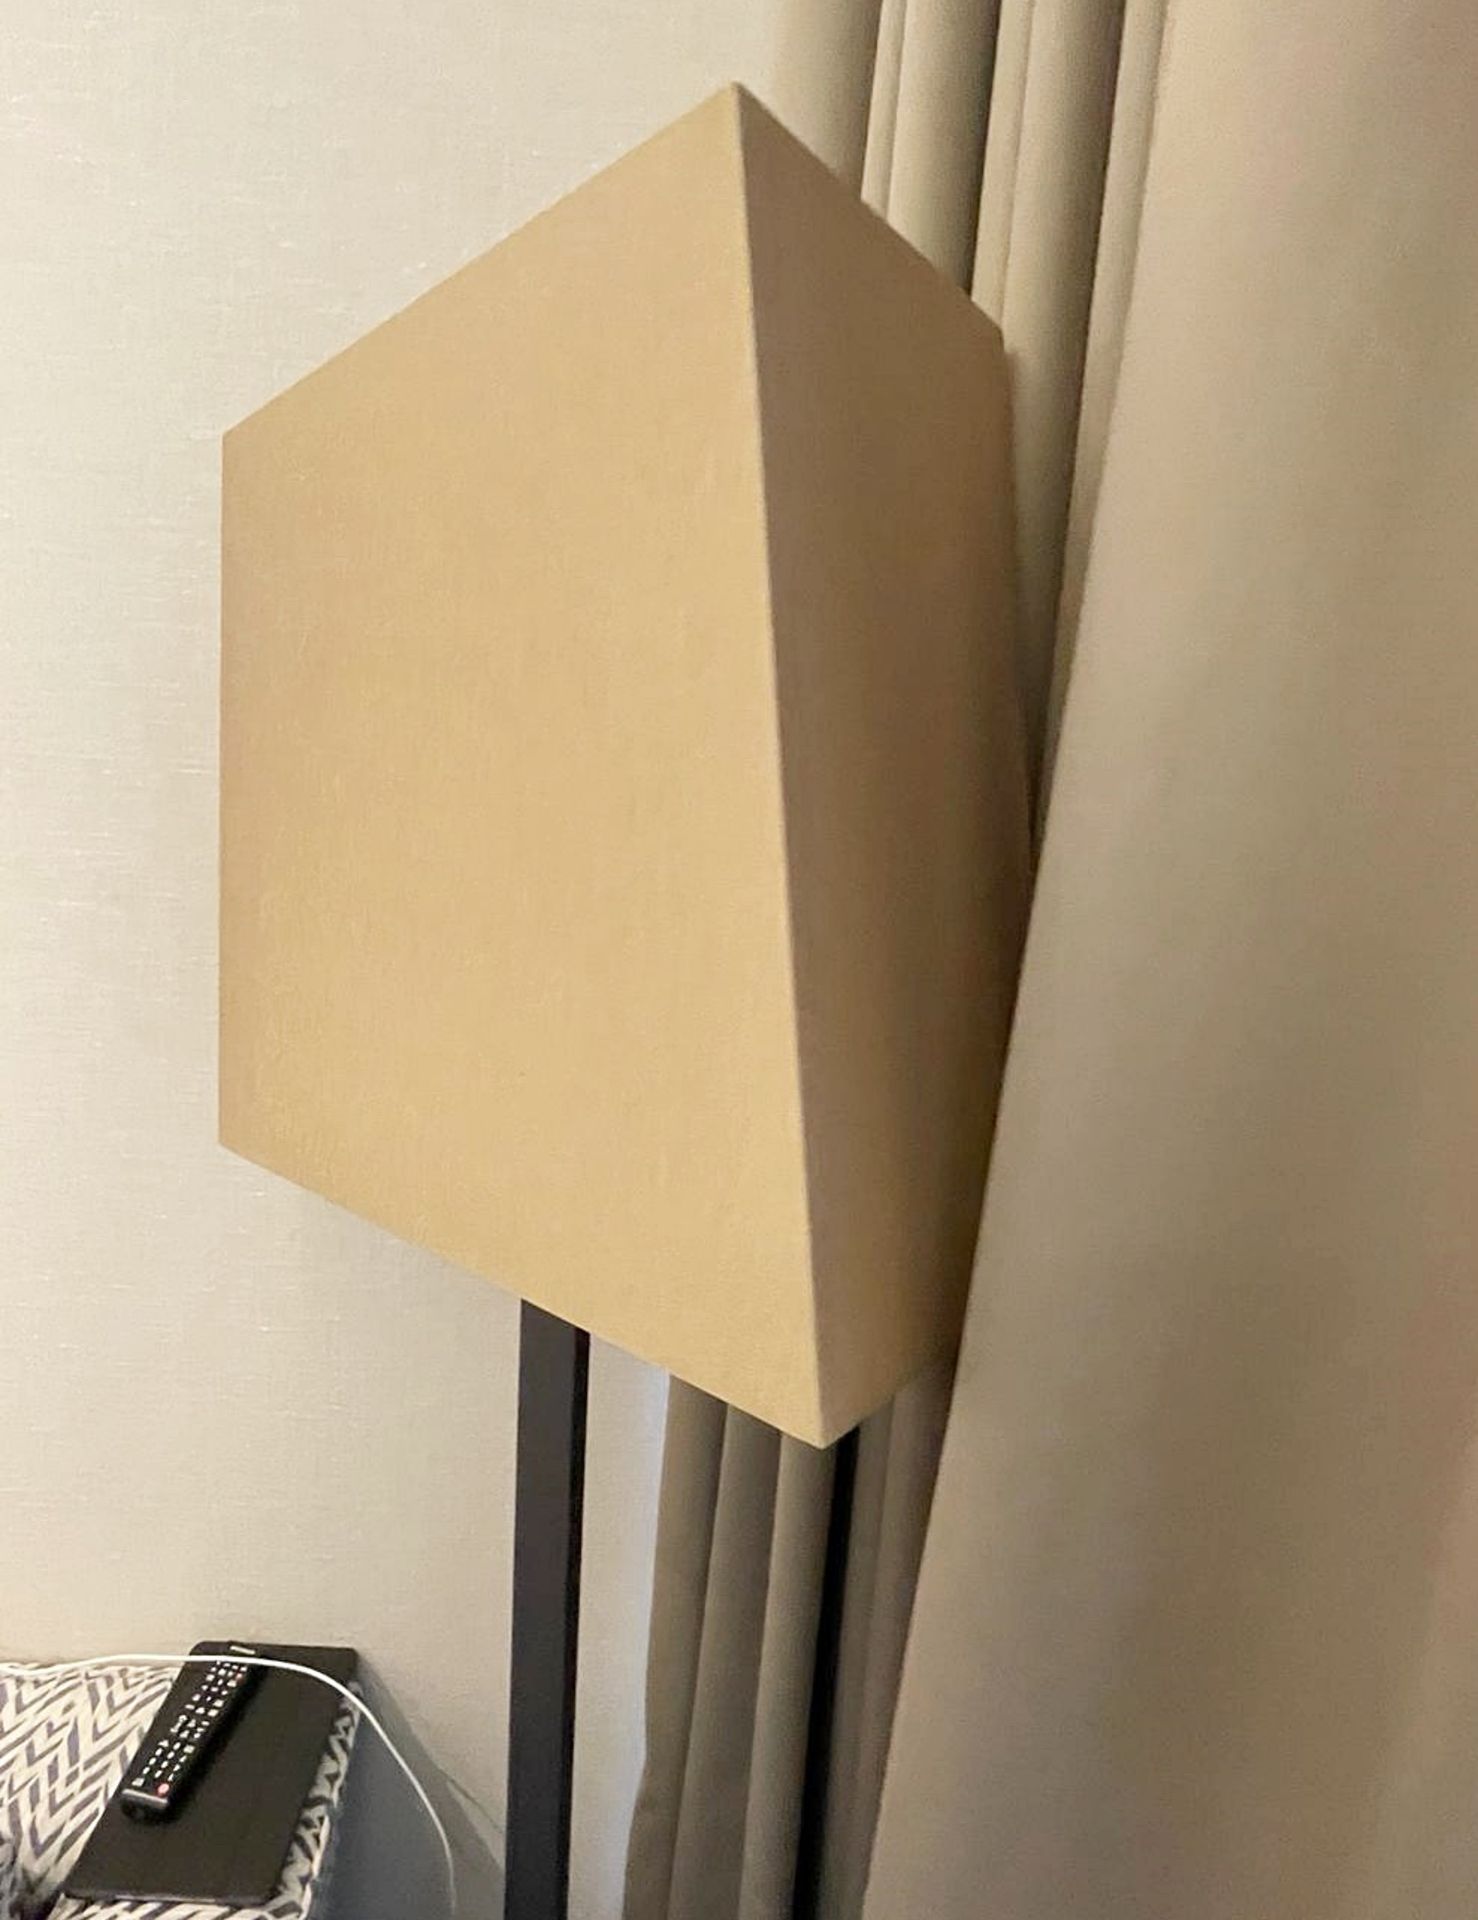 A Pair of Slender Profile Floor Lamps with Modern Angular Shades and Bronzed Finish - Image 6 of 11